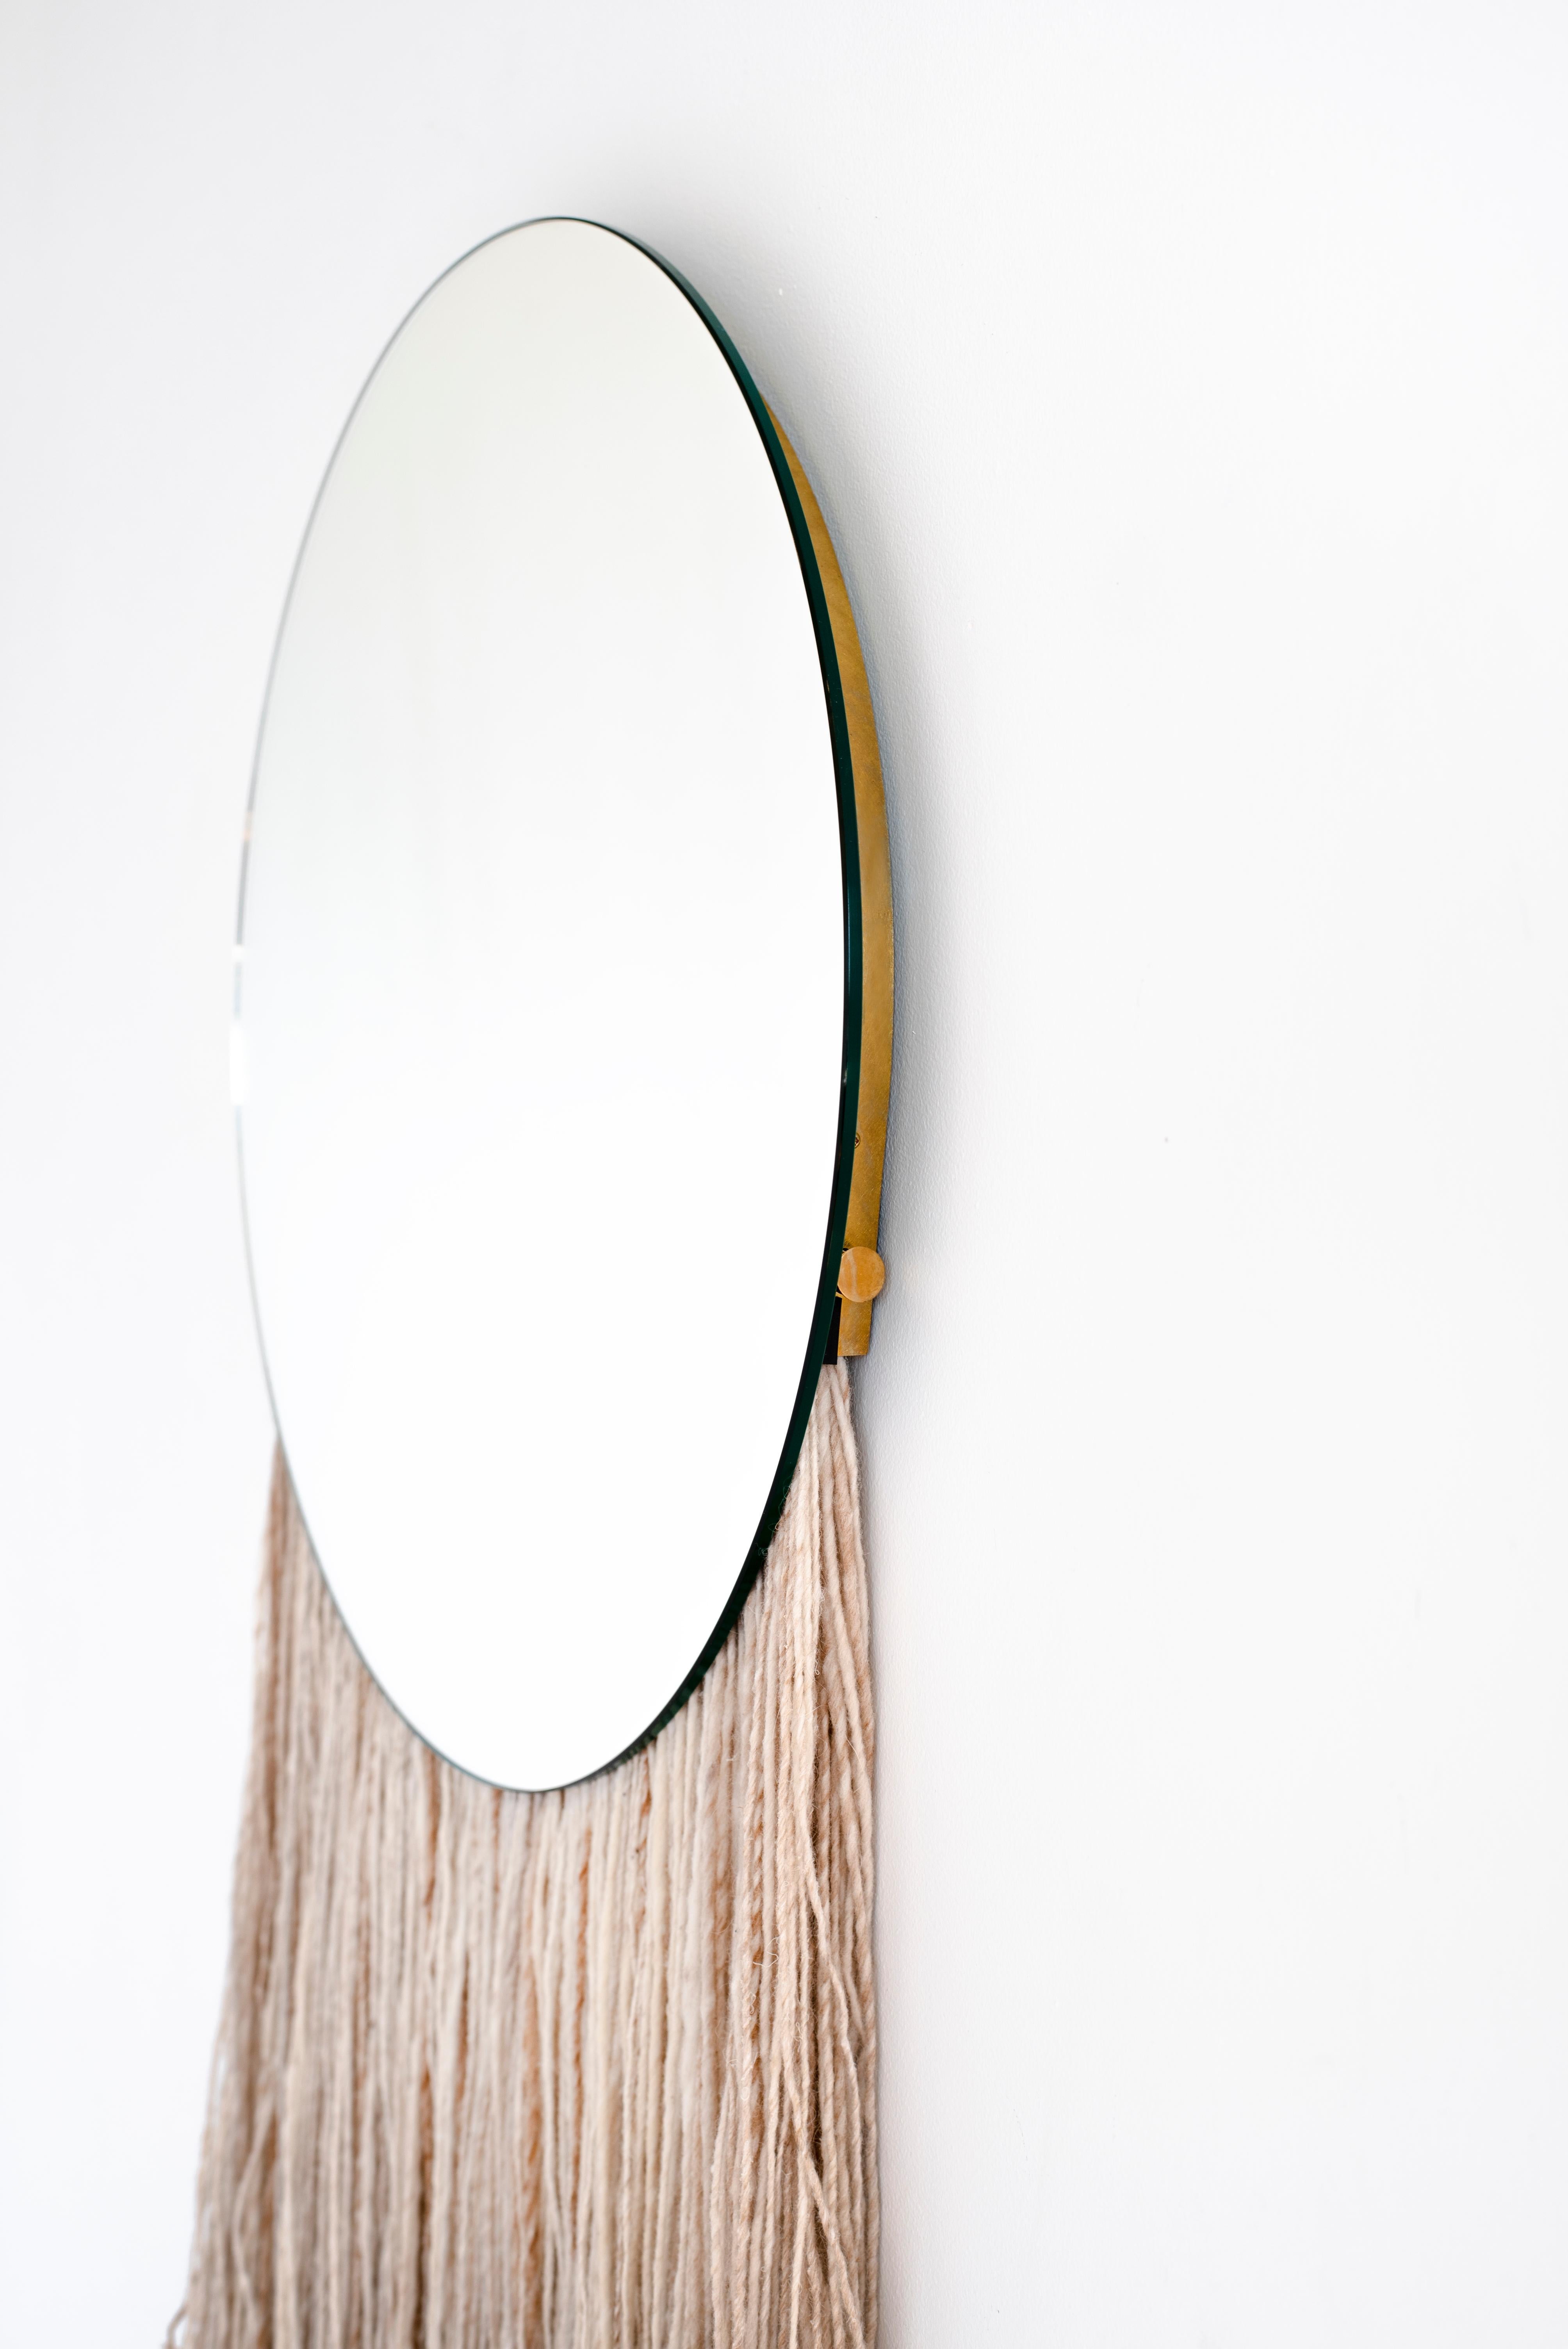 Round Clear Mirror with Fiber - Contemporary Eos Mirror by Ben & Aja Blanc In New Condition For Sale In Rumford, RI